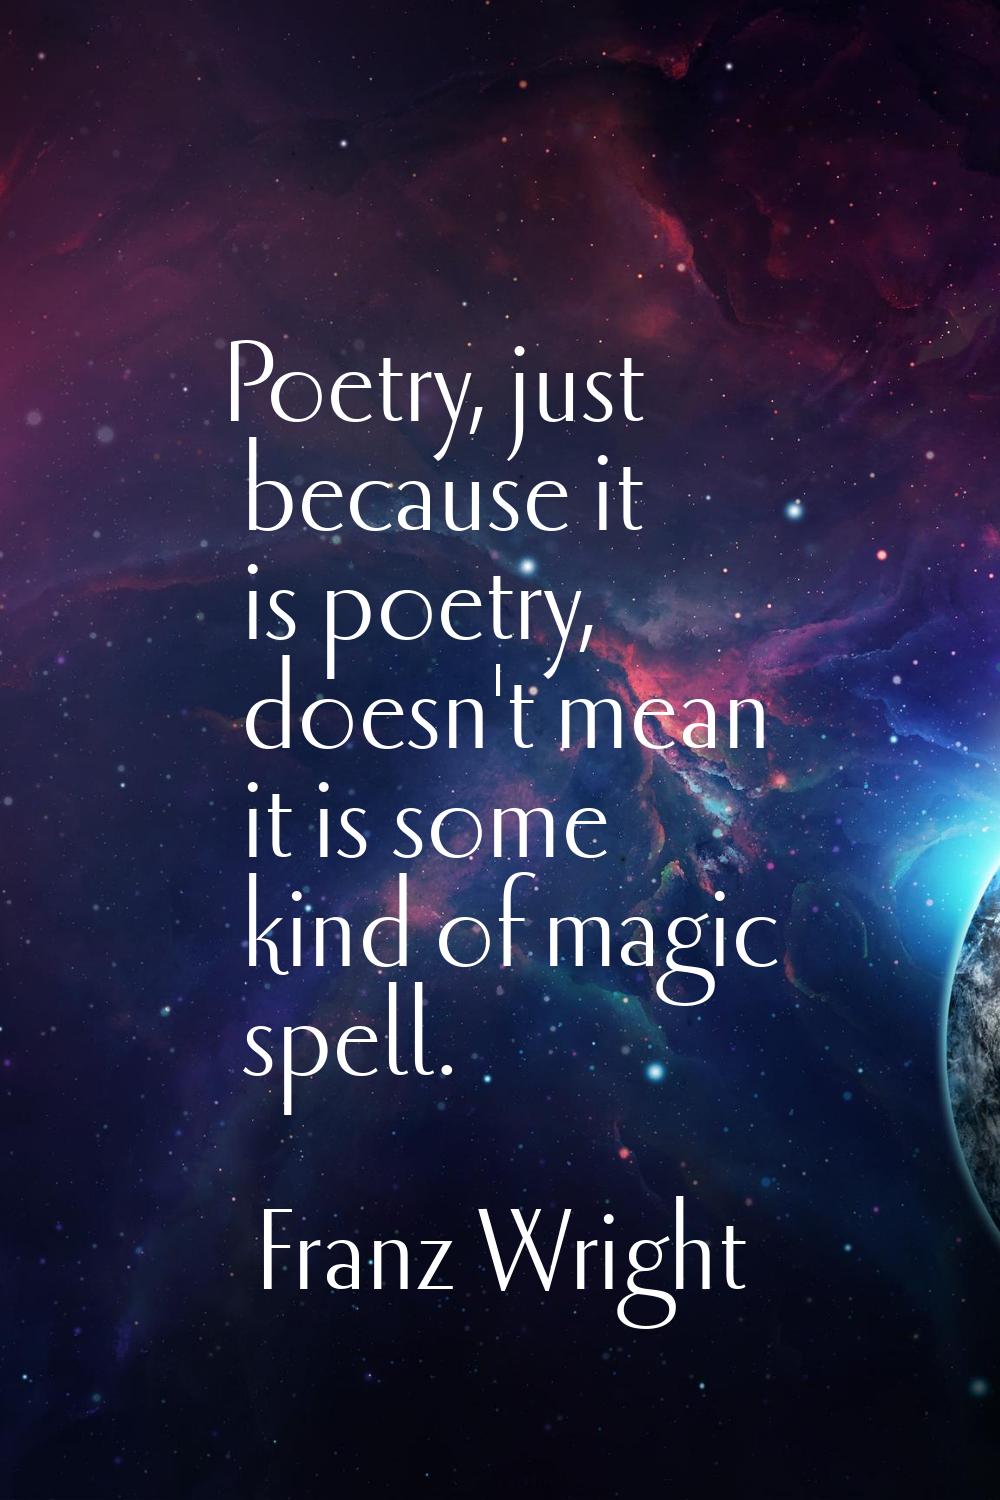 Poetry, just because it is poetry, doesn't mean it is some kind of magic spell.